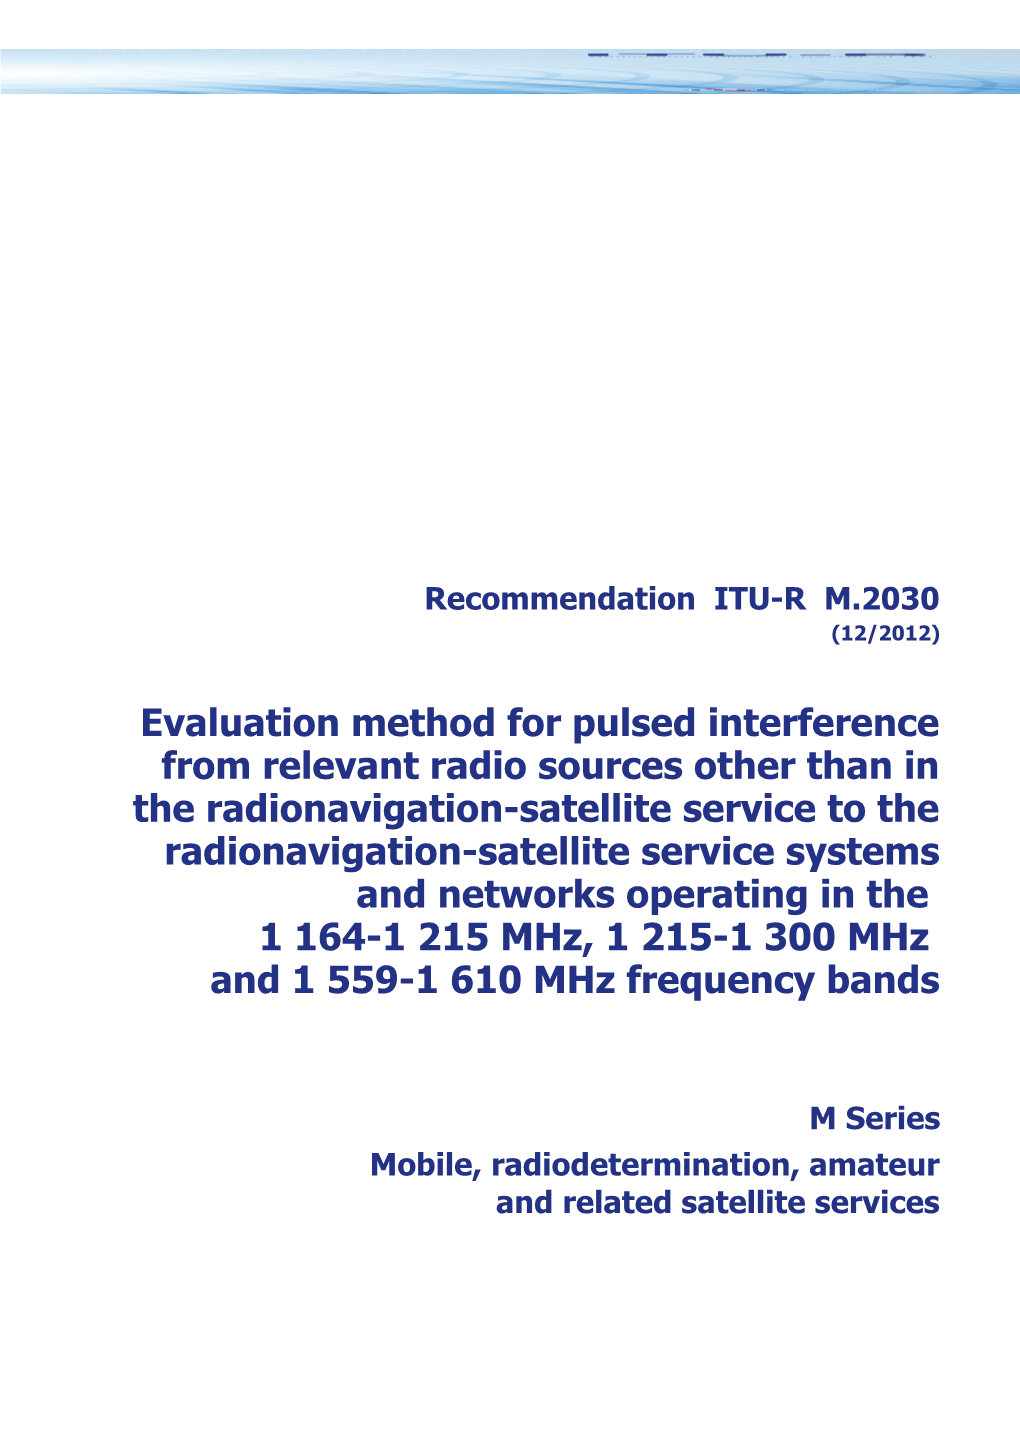 RECOMMENDATION ITU-R M.2030 - Evaluation Method for Pulsed Interference from Relevant Radio